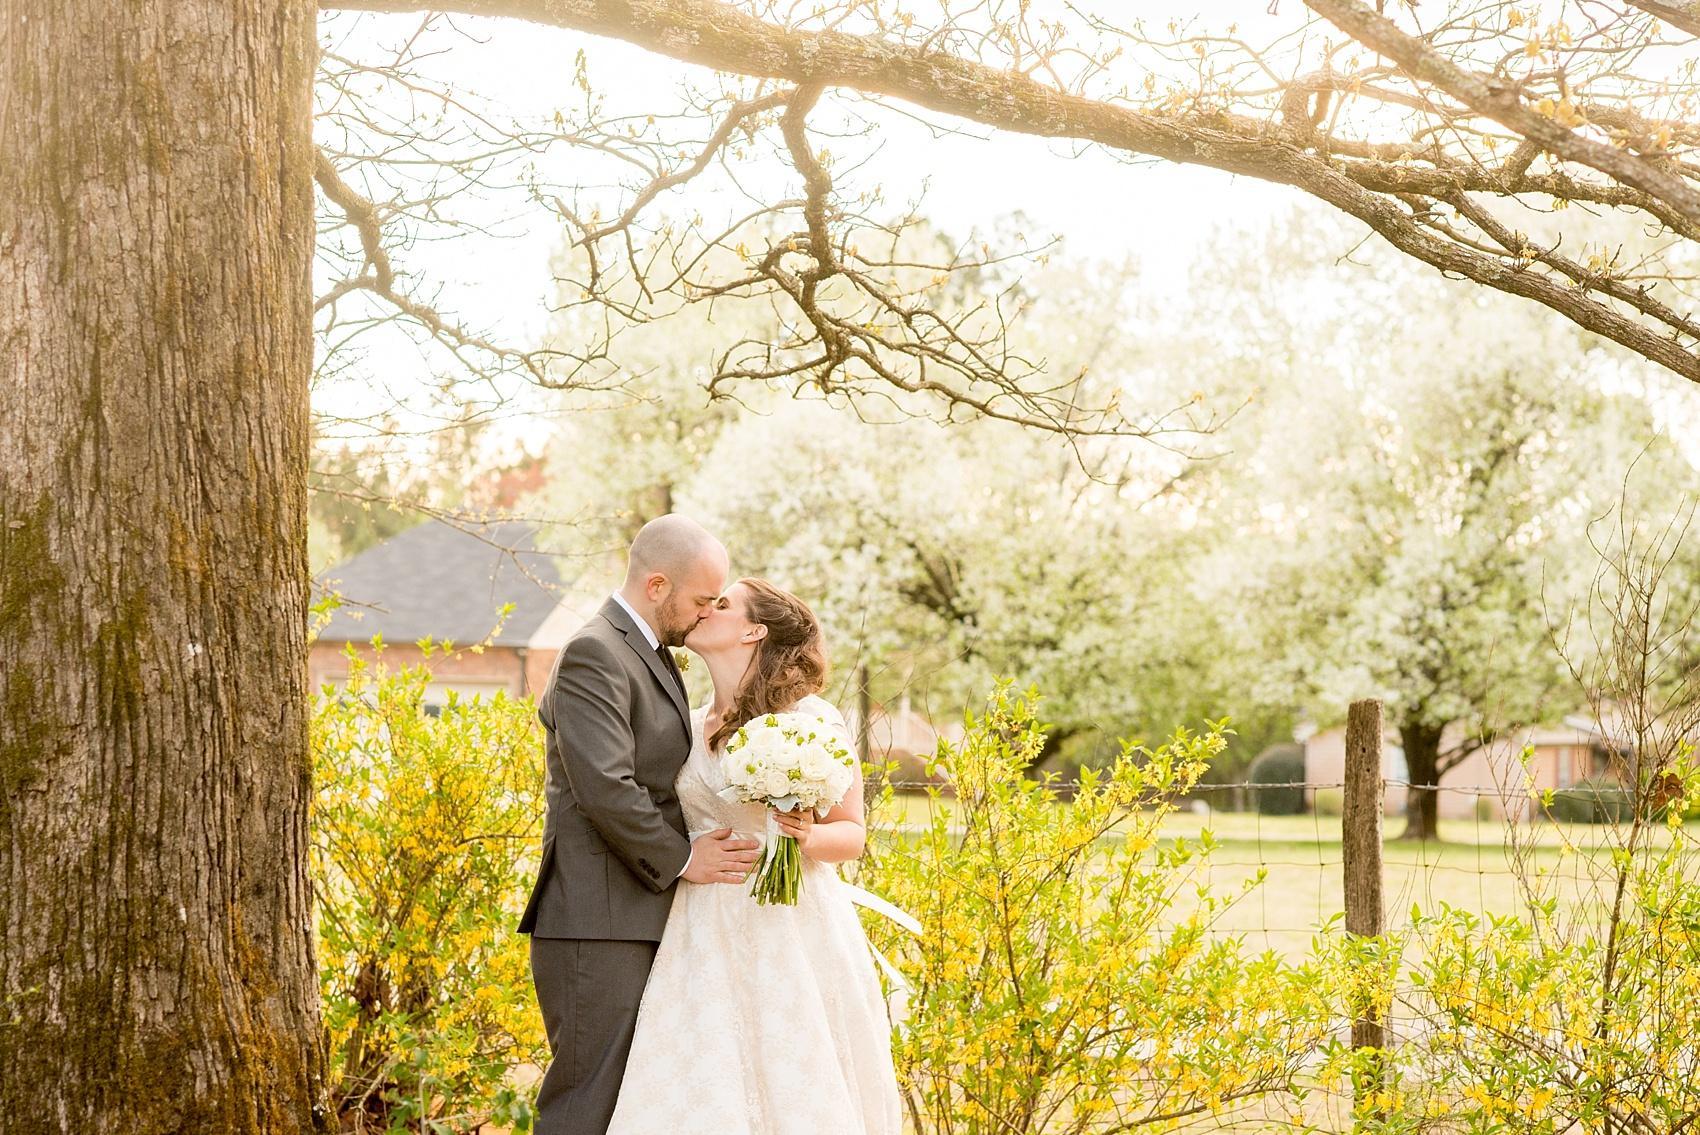 Bride and groom golden hour portraits with yellow spring flowers at their wedding at Four Oaks Manor in Atlanta. Photos by Mikkel Paige Photography.